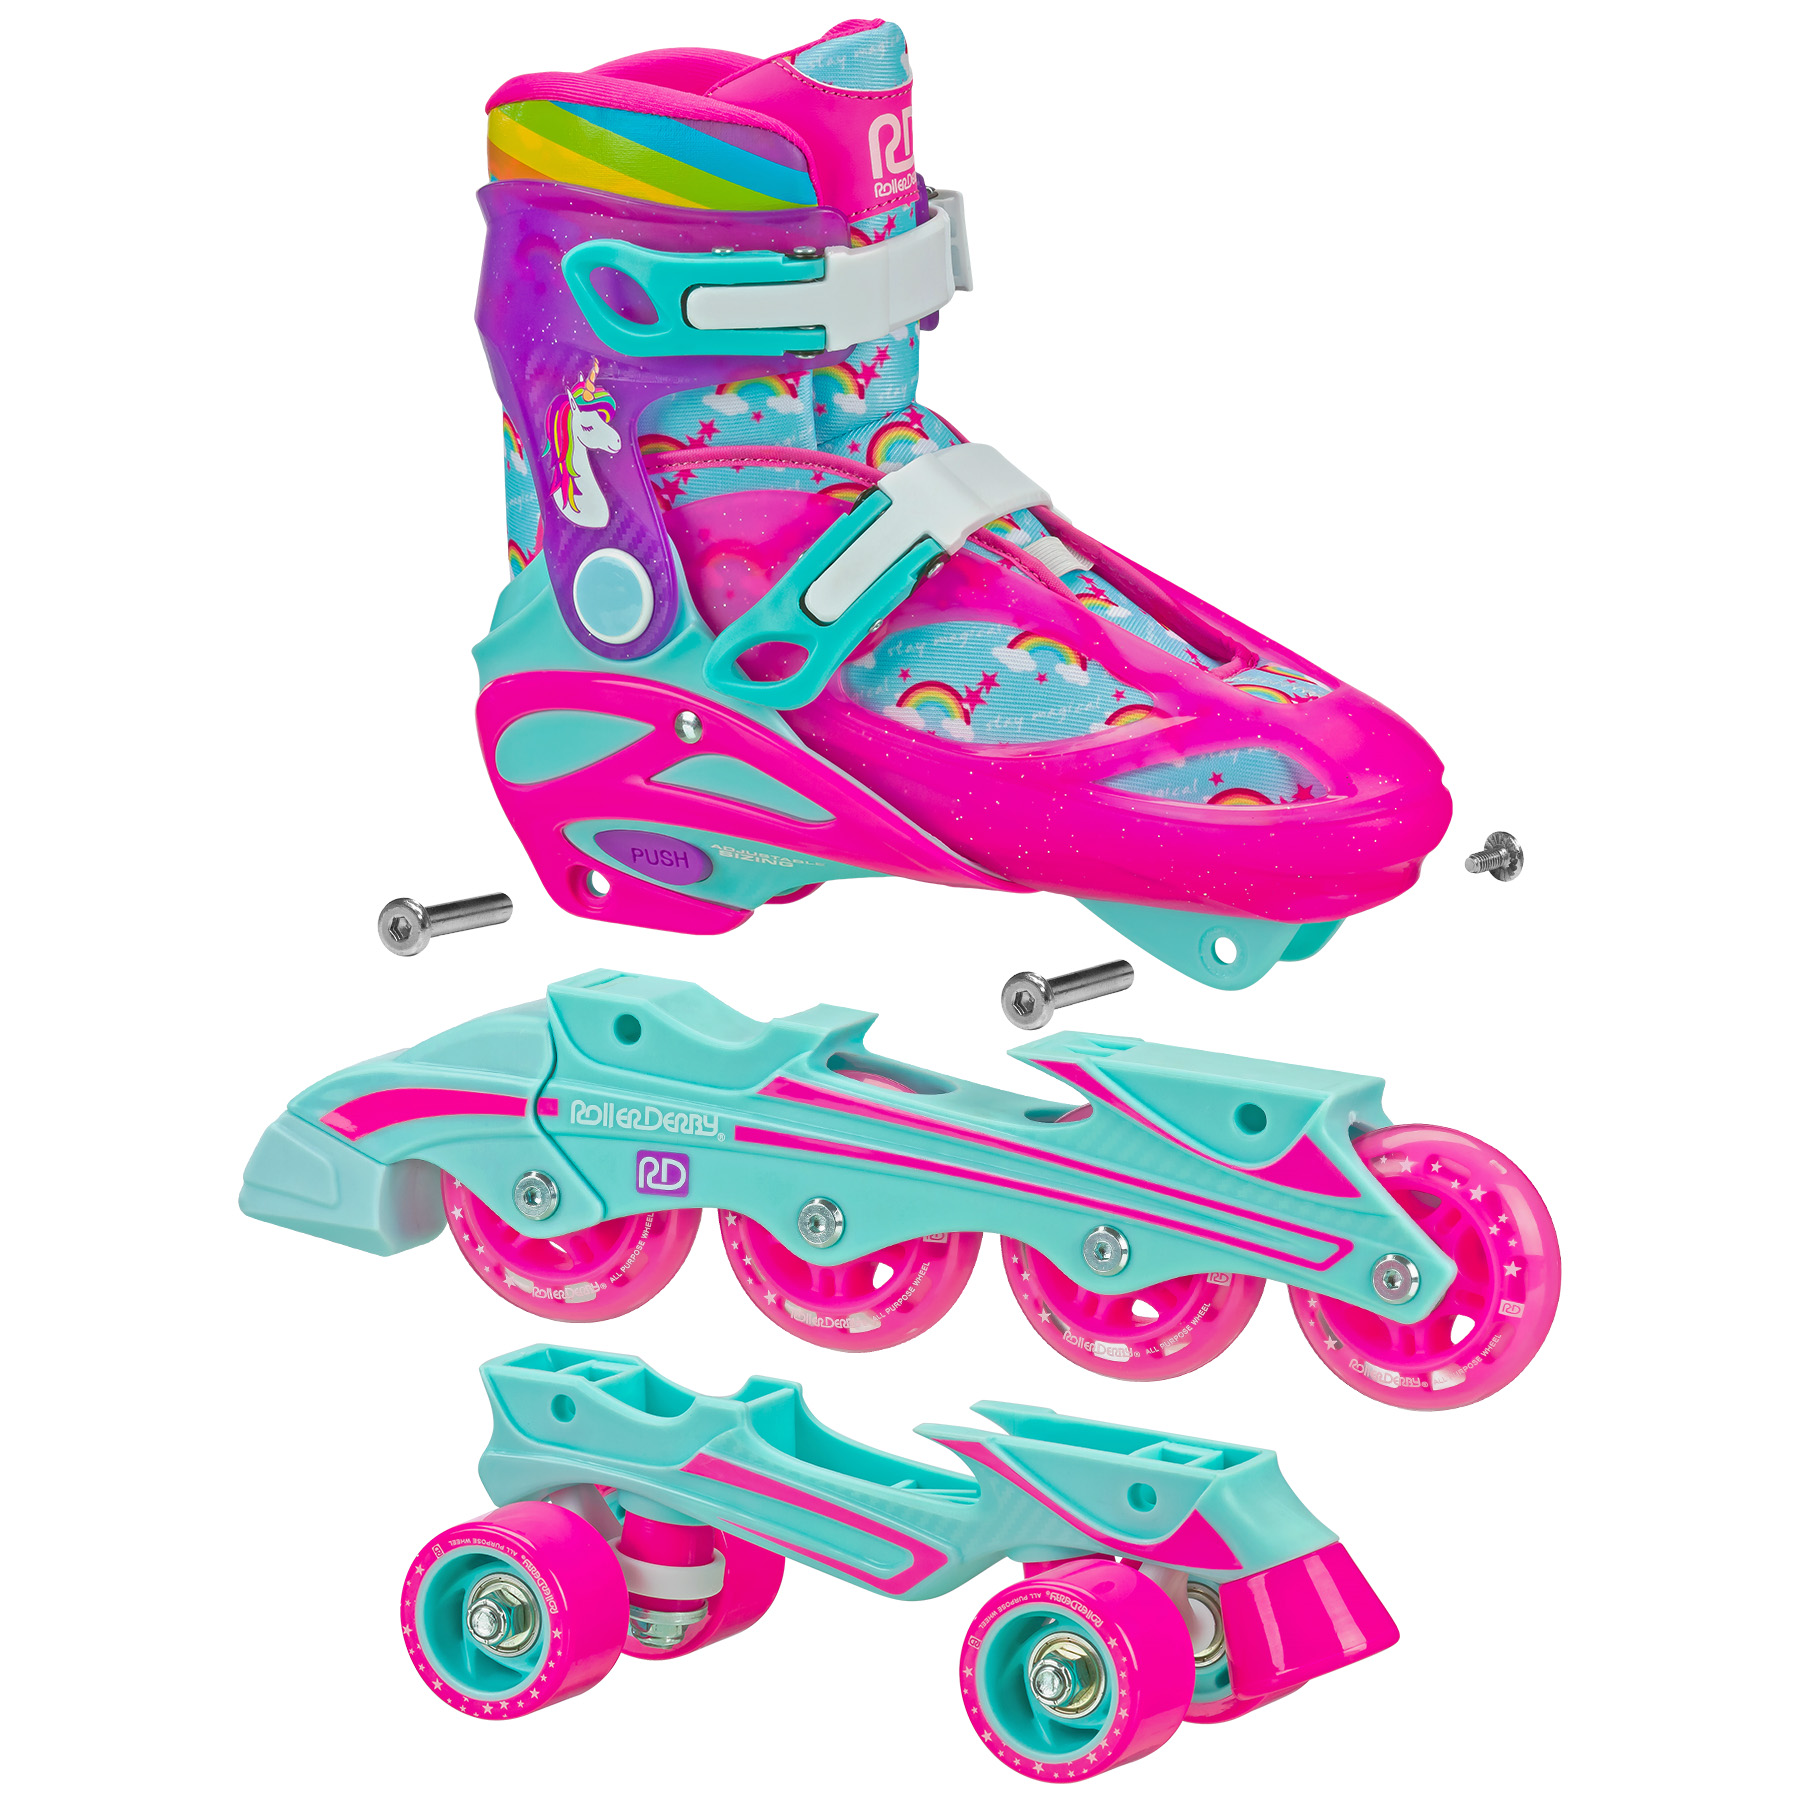 Roller Derby Sprinter Girl's 2-in-1 Quad Roller and Inline Skates Combo, Unicorn, Small (Size 12-2) - image 2 of 5